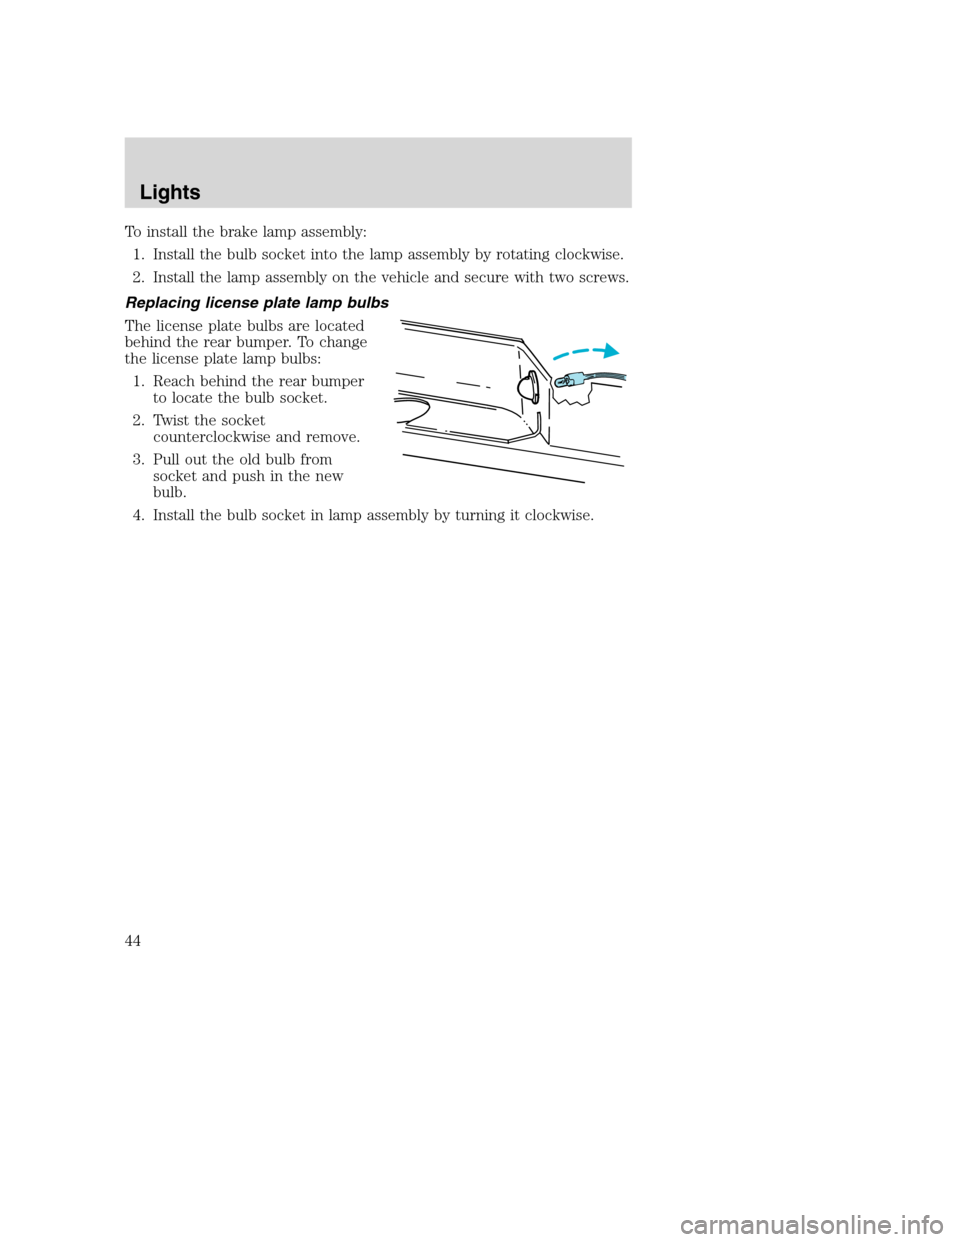 MAZDA MODEL B-SERIES 2005  Owners Manual (in English) To install the brake lamp assembly:
1. Install the bulb socket into the lamp assembly by rotating clockwise.
2. Install the lamp assembly on the vehicle and secure with two screws.
Replacing license p